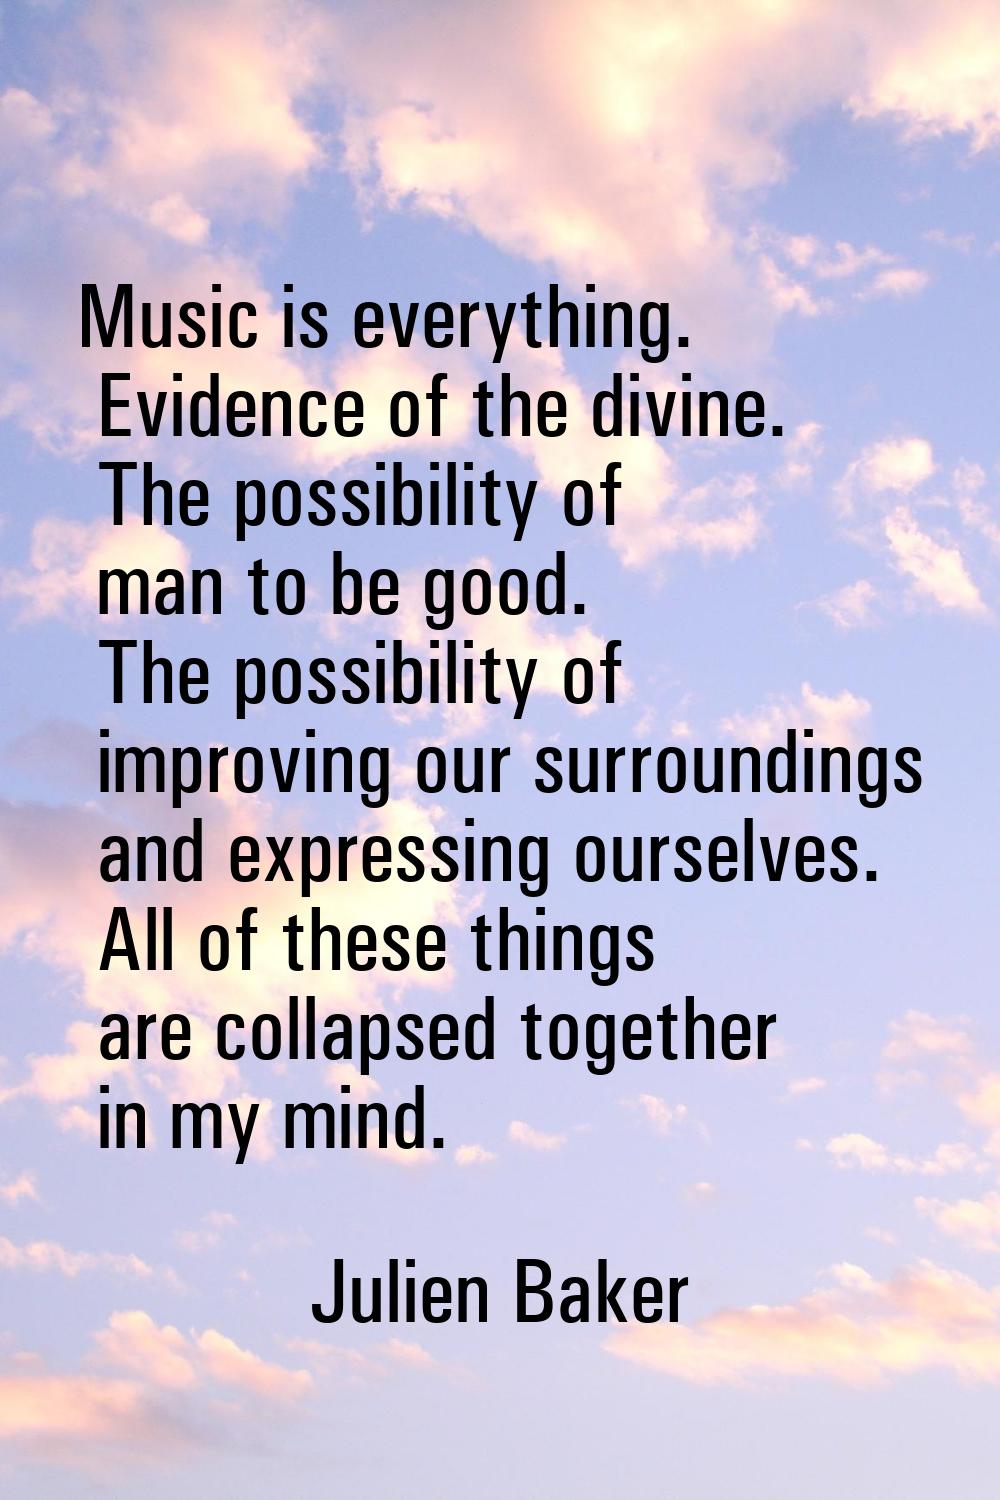 Music is everything. Evidence of the divine. The possibility of man to be good. The possibility of 